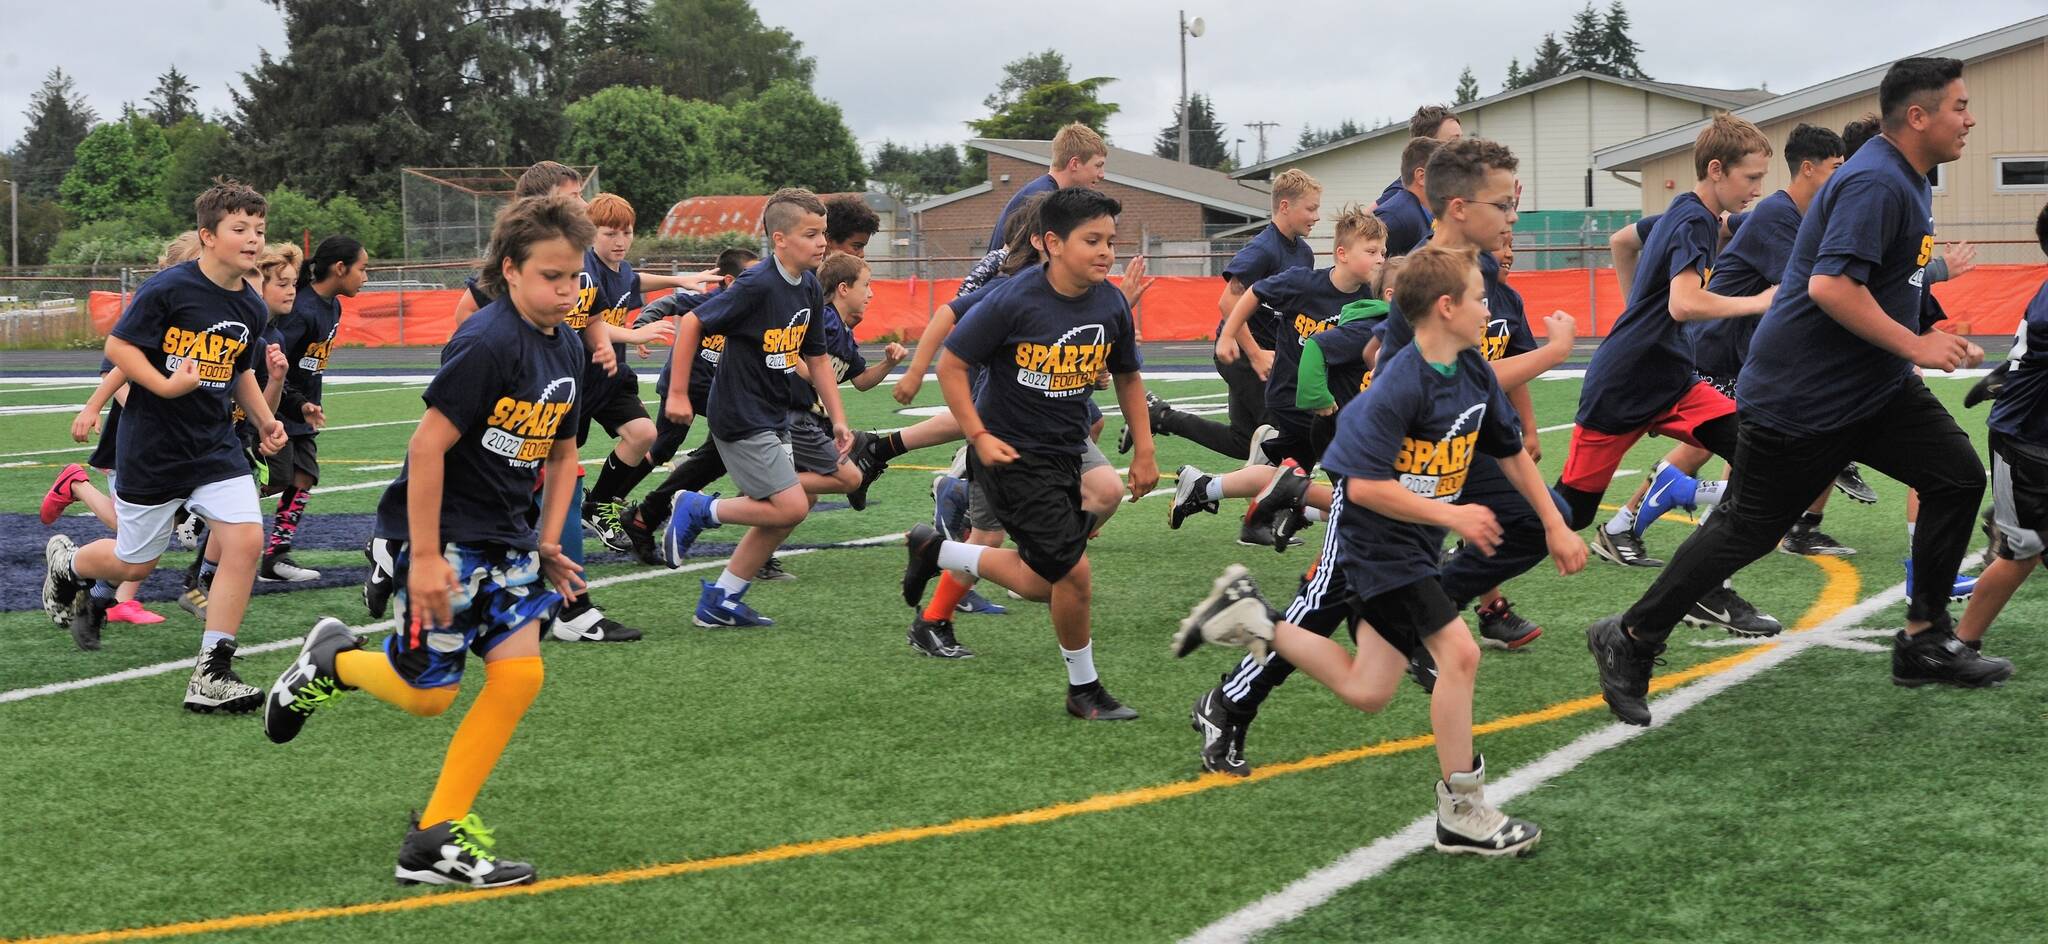 No sport could begin without calisthenics so these Spartan hopefuls were off and running you see. It was learned that it was one big football family as was expressed by Coach Highfield.